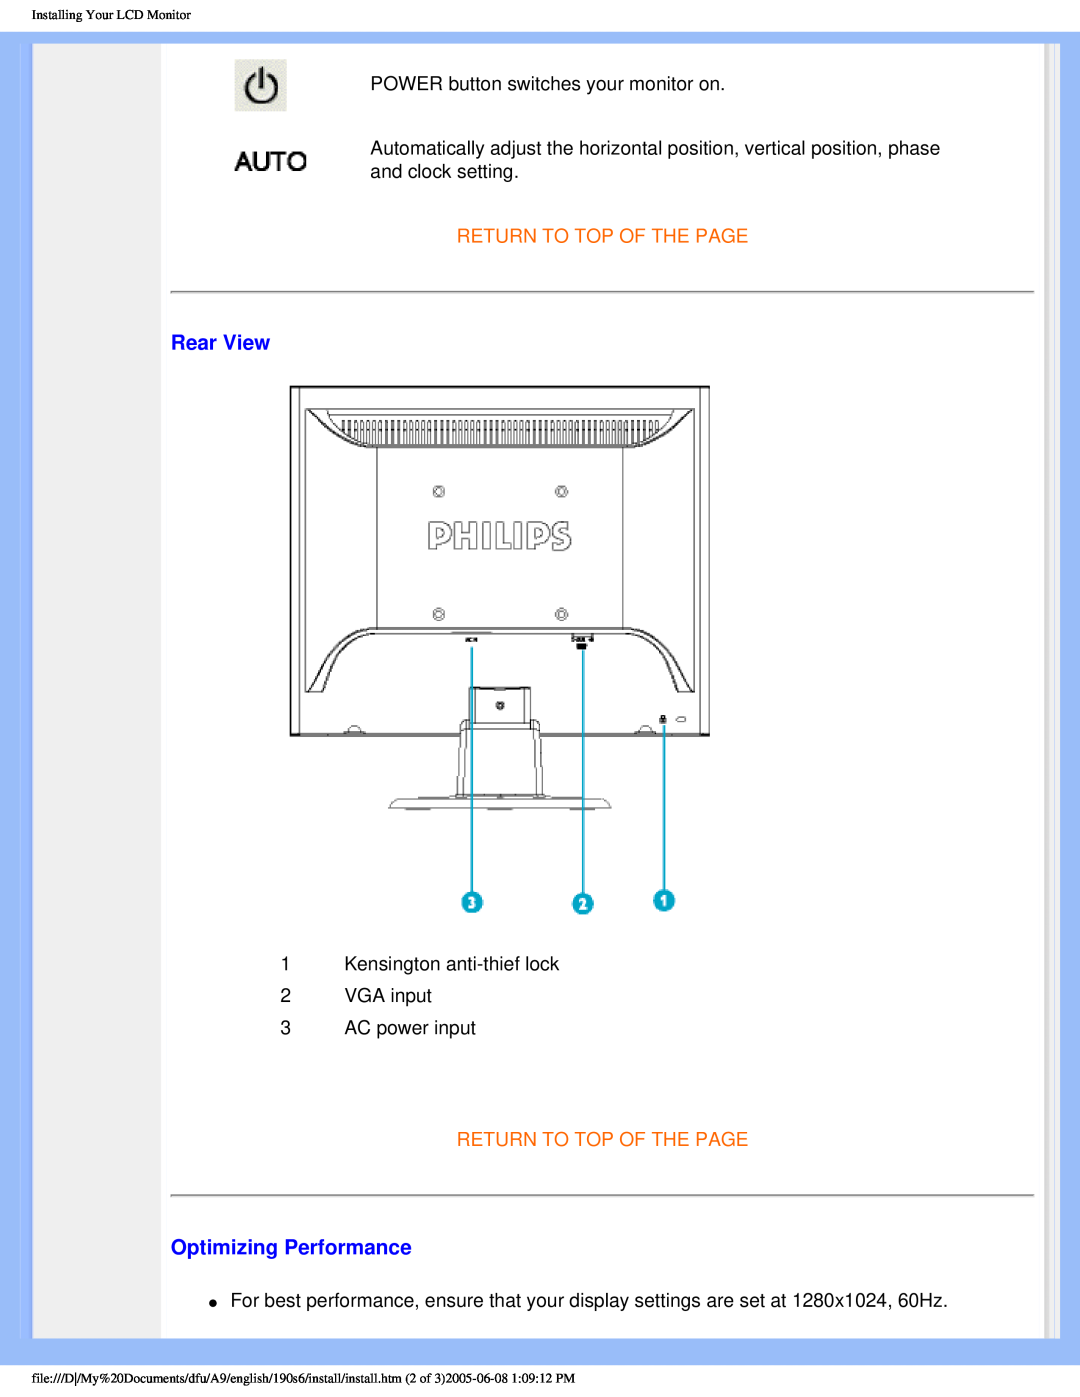 Philips 190P6 user manual Rear View, Optimizing Performance, Return To Top Of The Page 